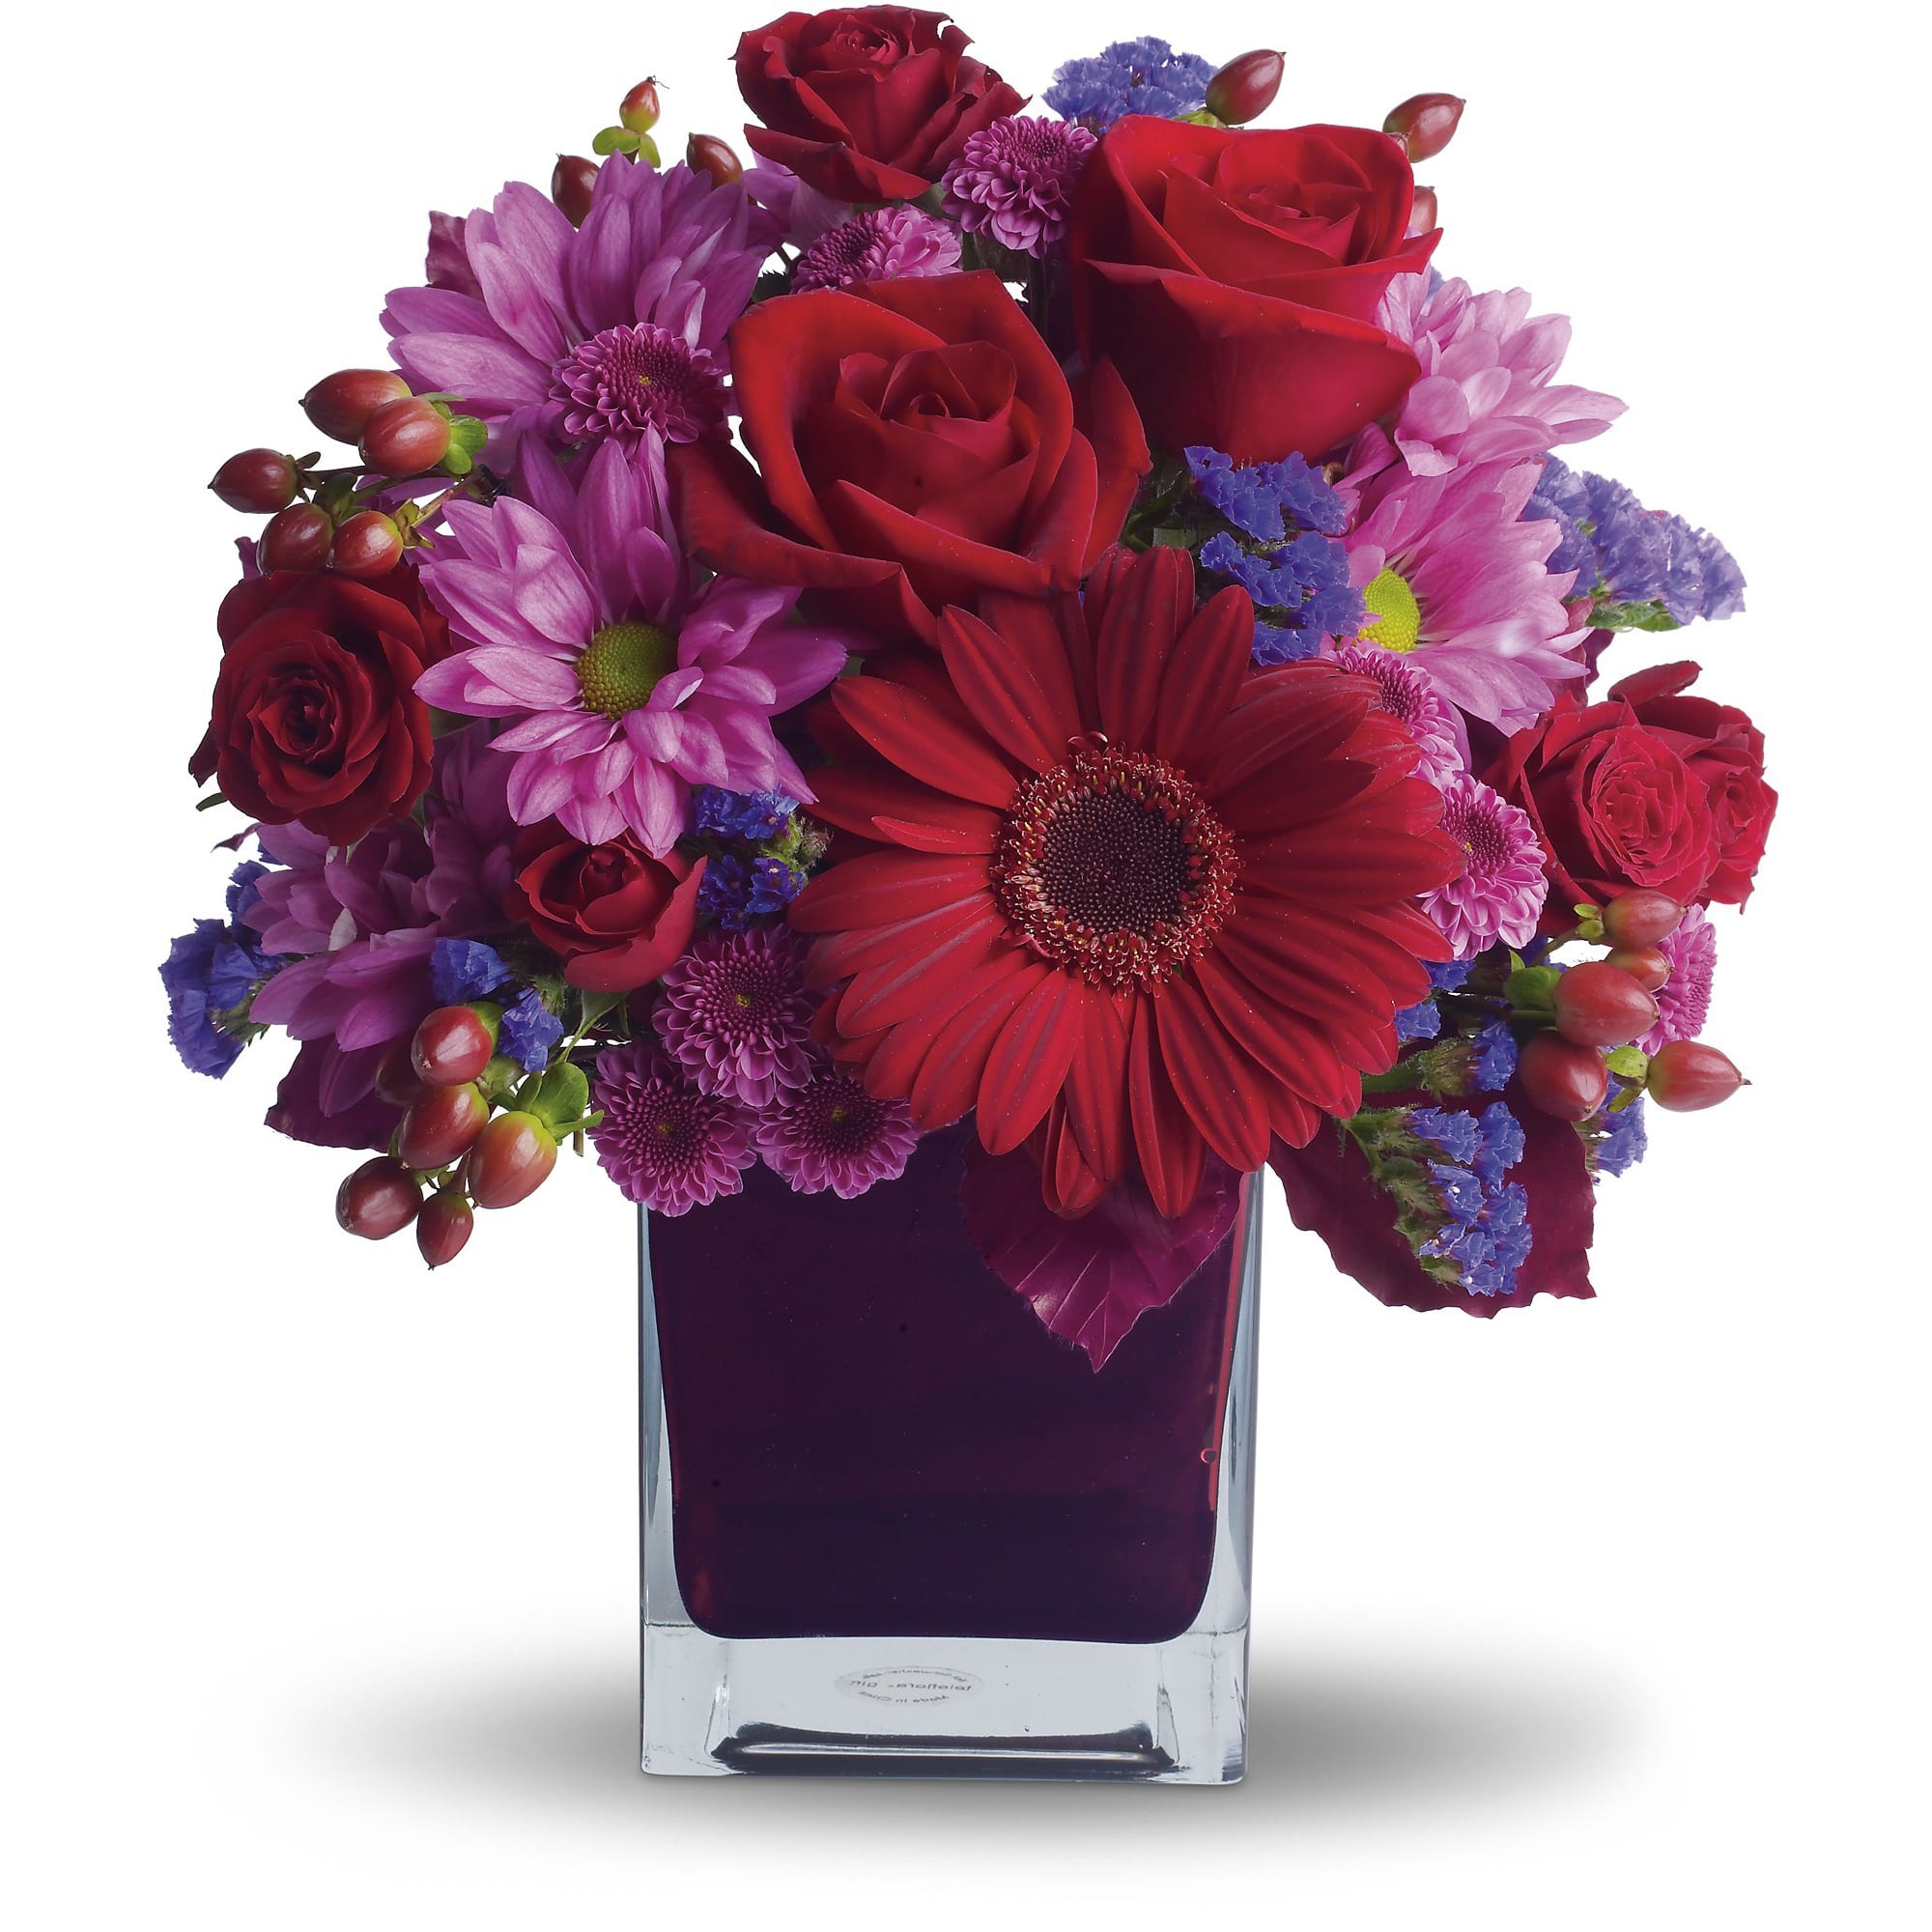 It's My Party by Teleflora - The only crying that this plum party arrangement might inspire are tears of joy! So fabulous. So fun. So fall with its jewel-toned modern cube that's chock full of gorgeous red, purple and perfect flowers.   	Approx. 10 1/2 W x 12 H